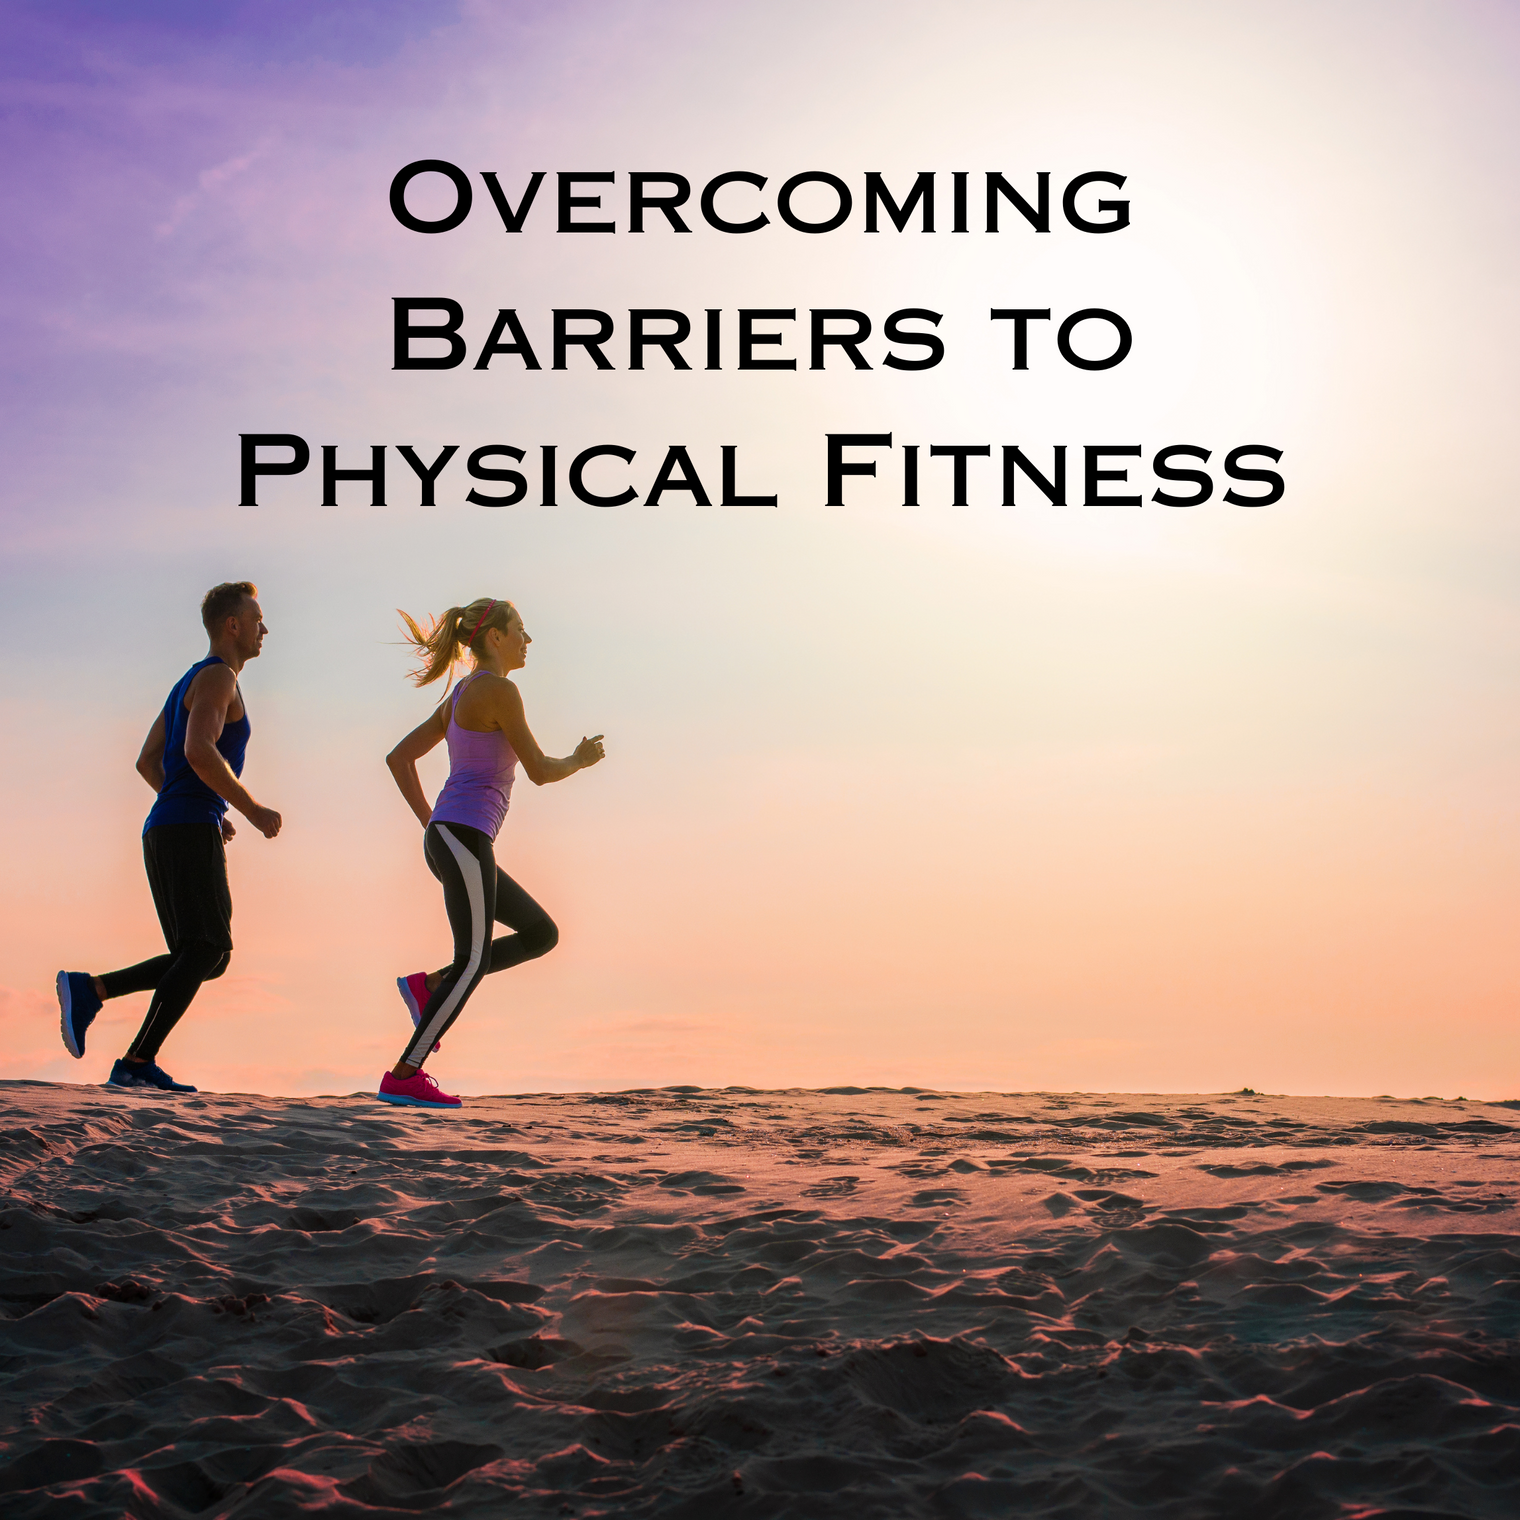 Overcoming Barriers to Physical Fitness